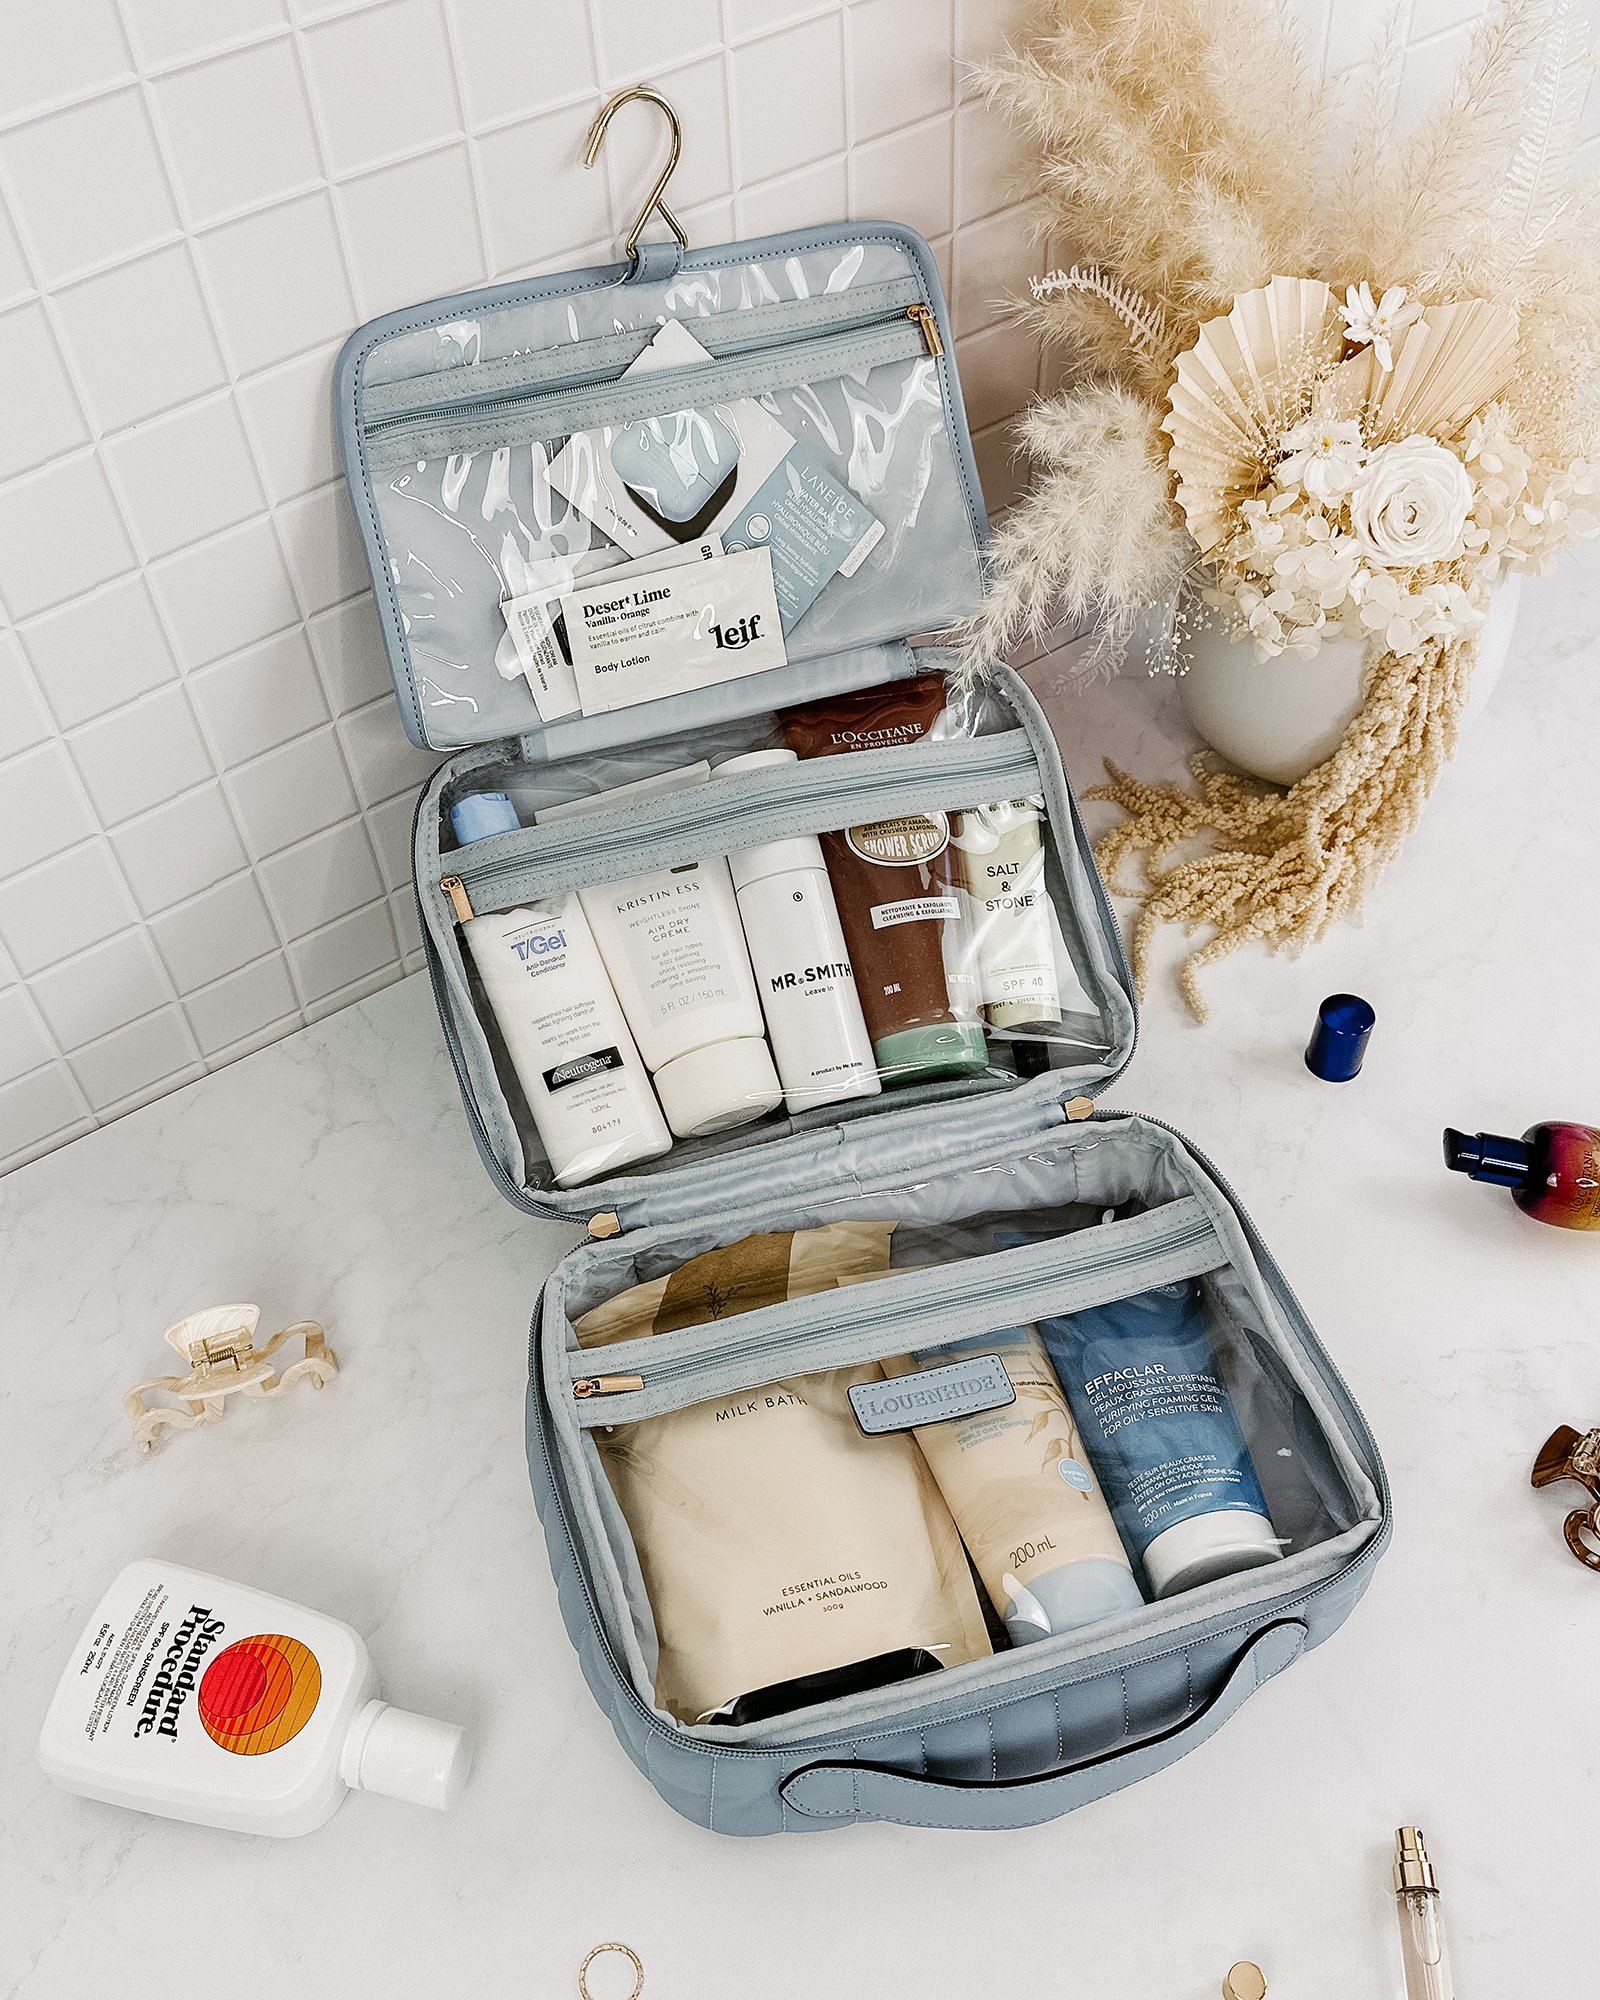 Louenhide Maggie Hanging Toiletry Case Recycled Chambray